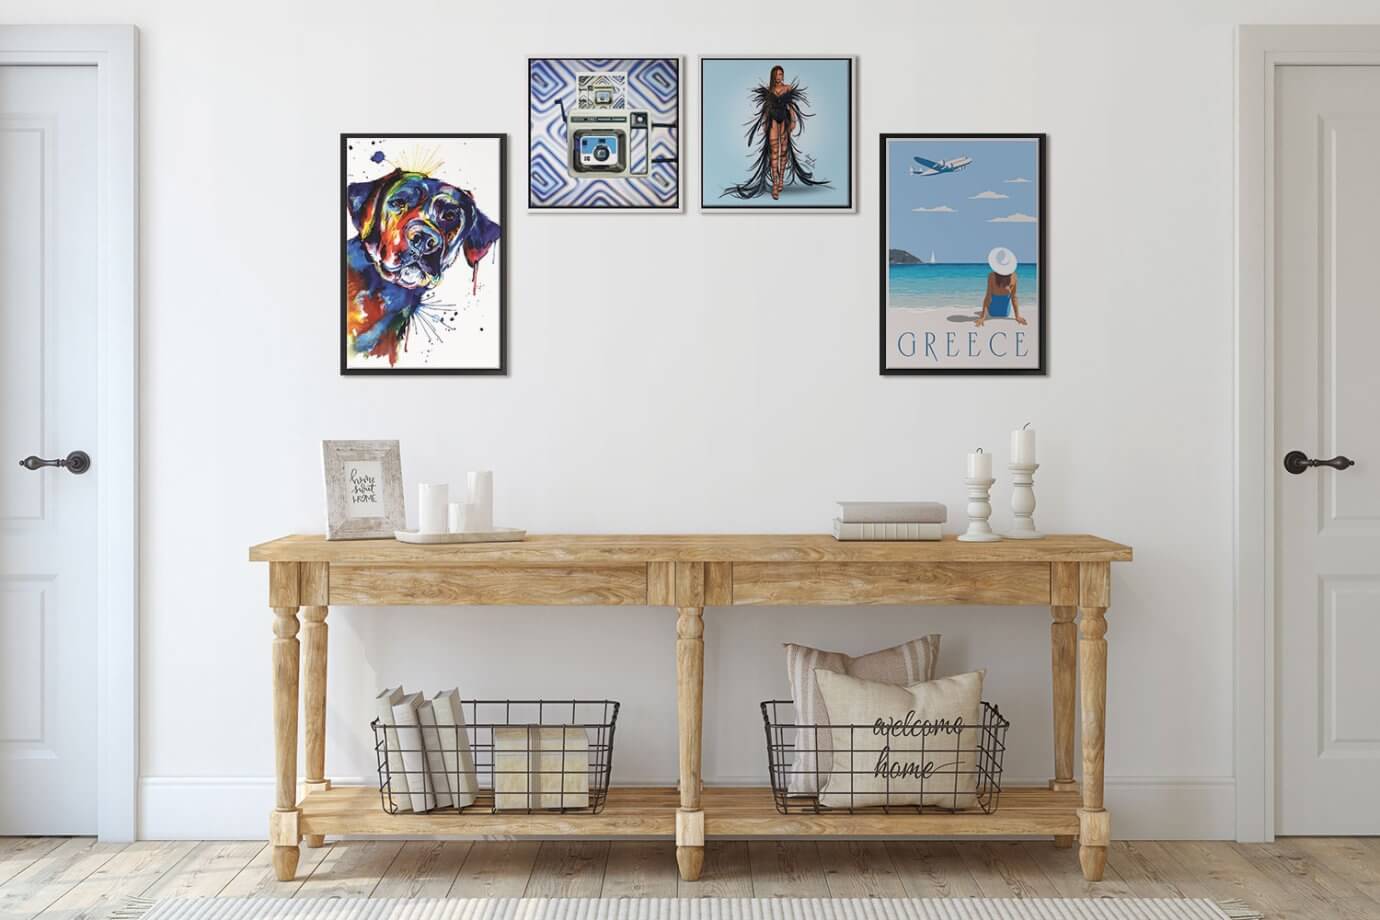 Dog painting, vintage camera art, and beyonce painting, and greece travel poster above a wood entryway table